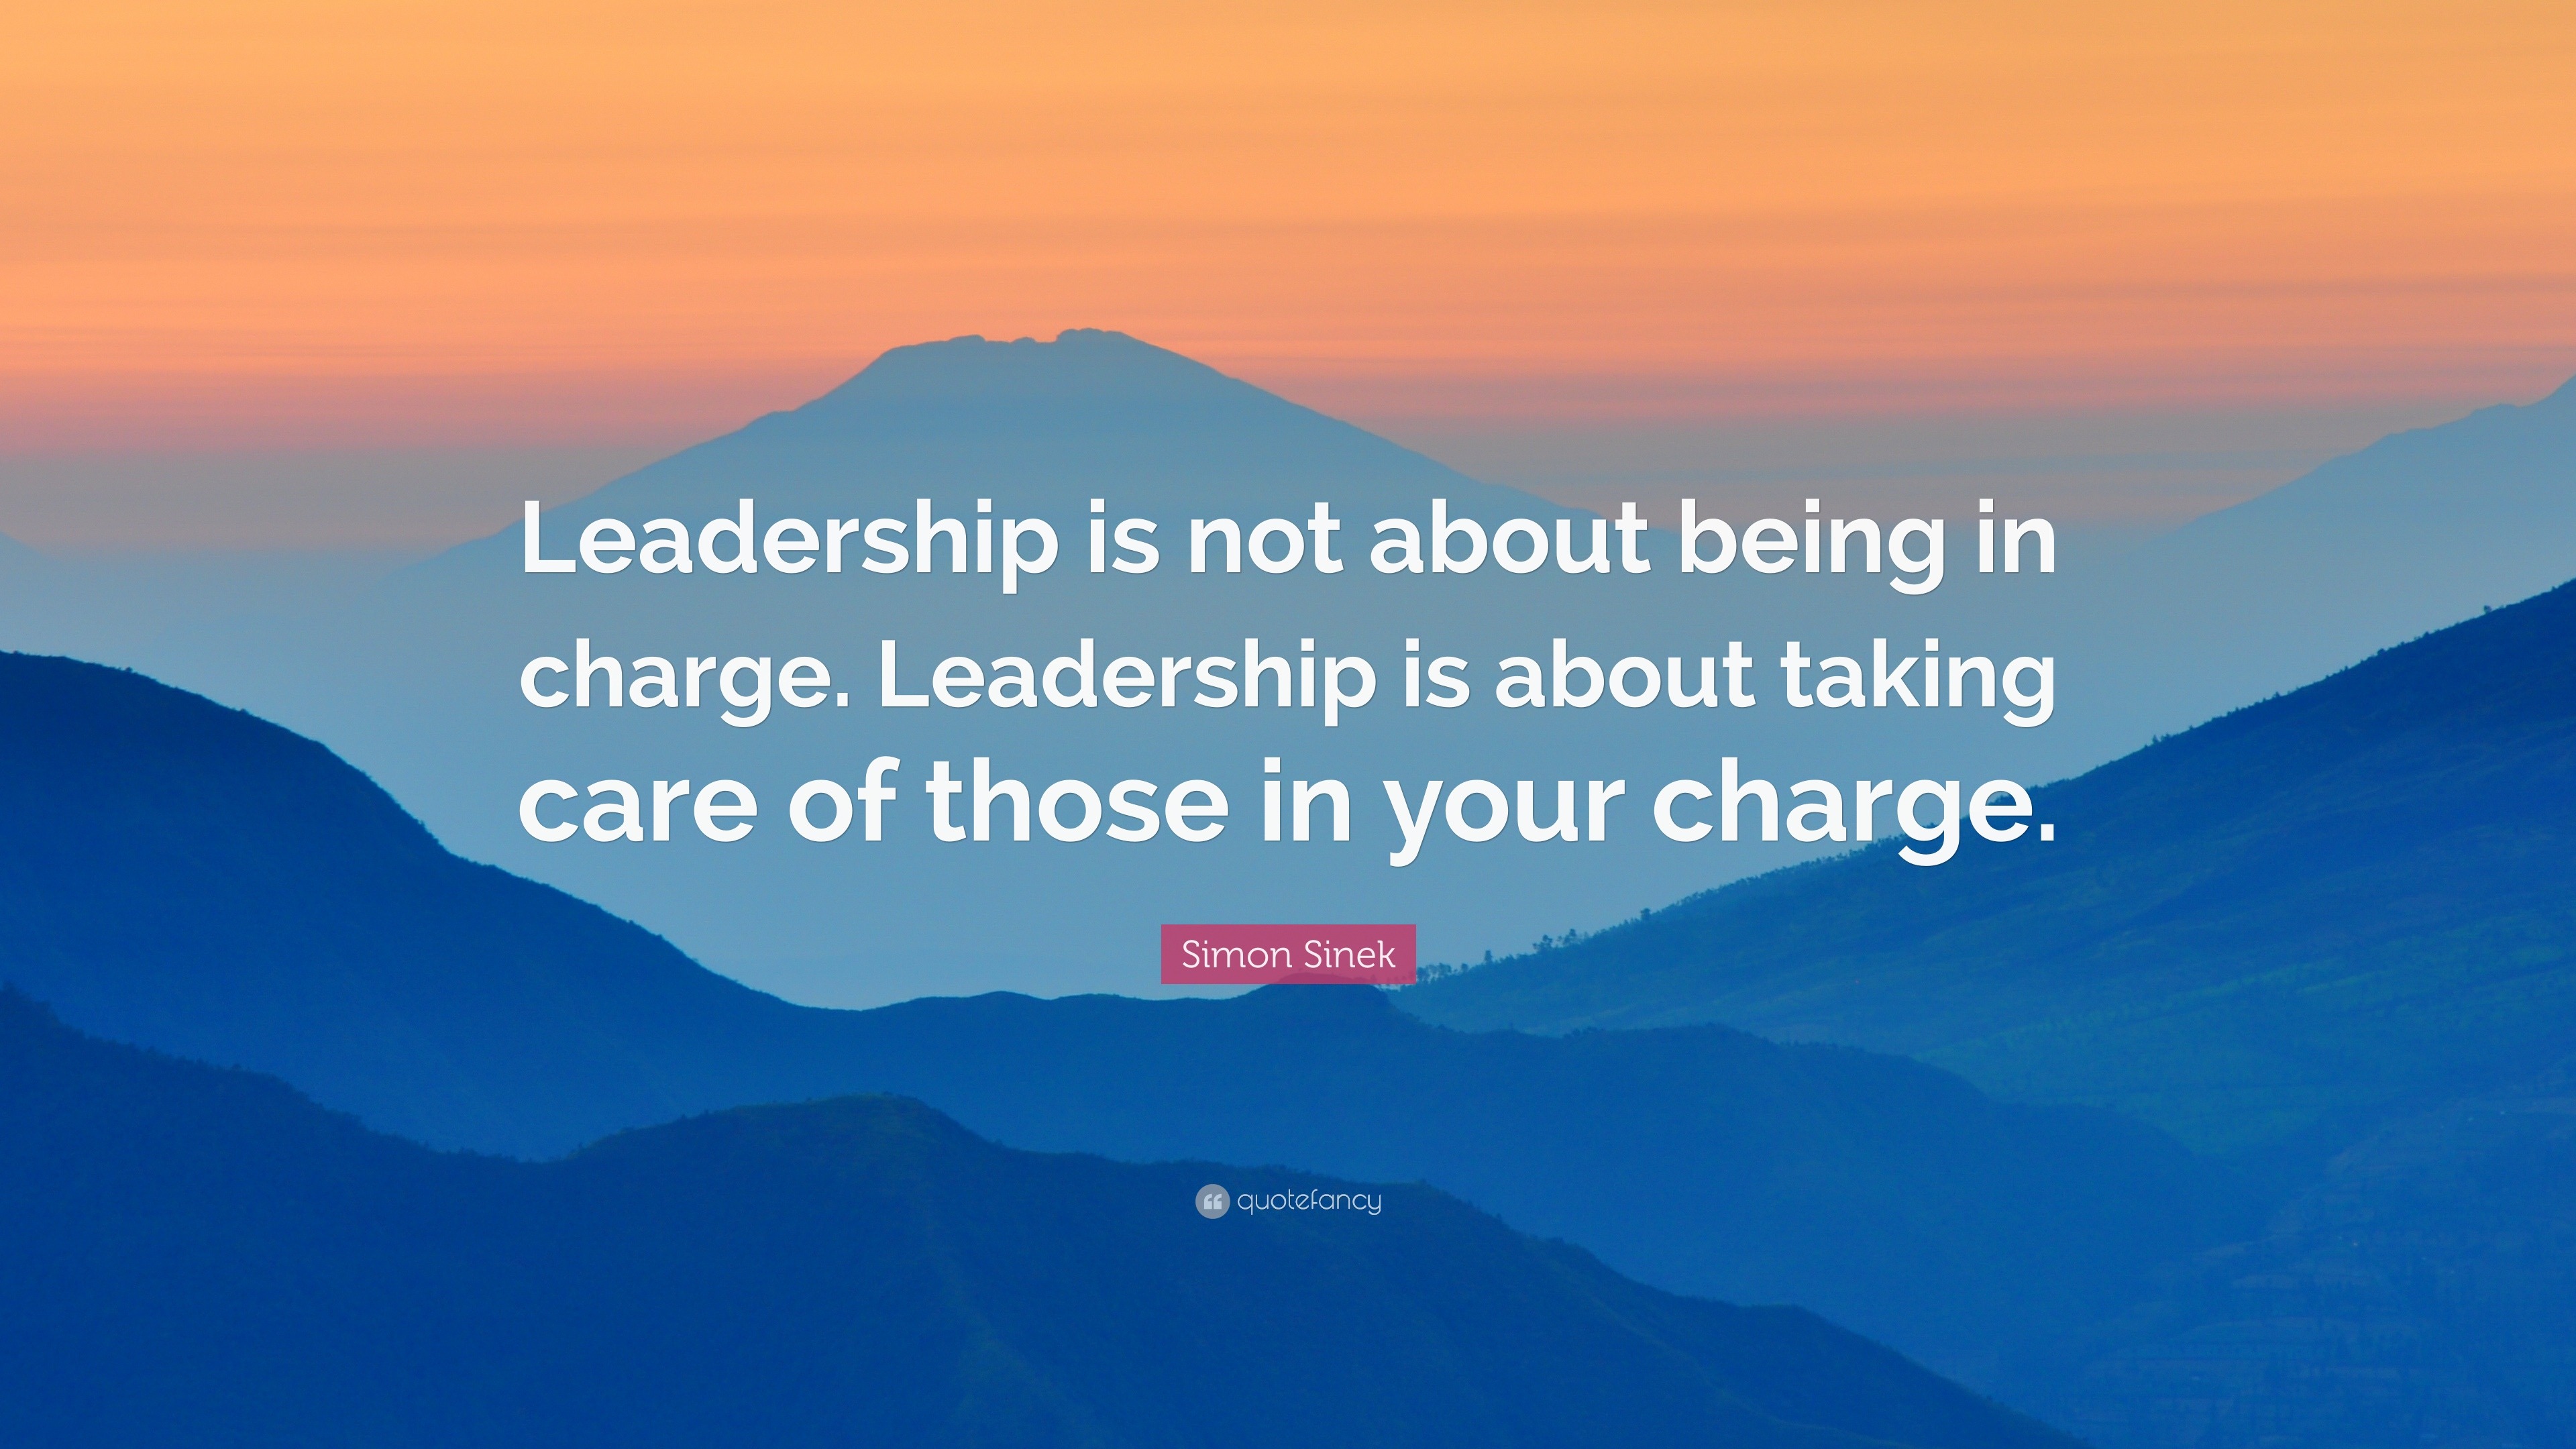 Simon Sinek Quote “Leadership is not about being in